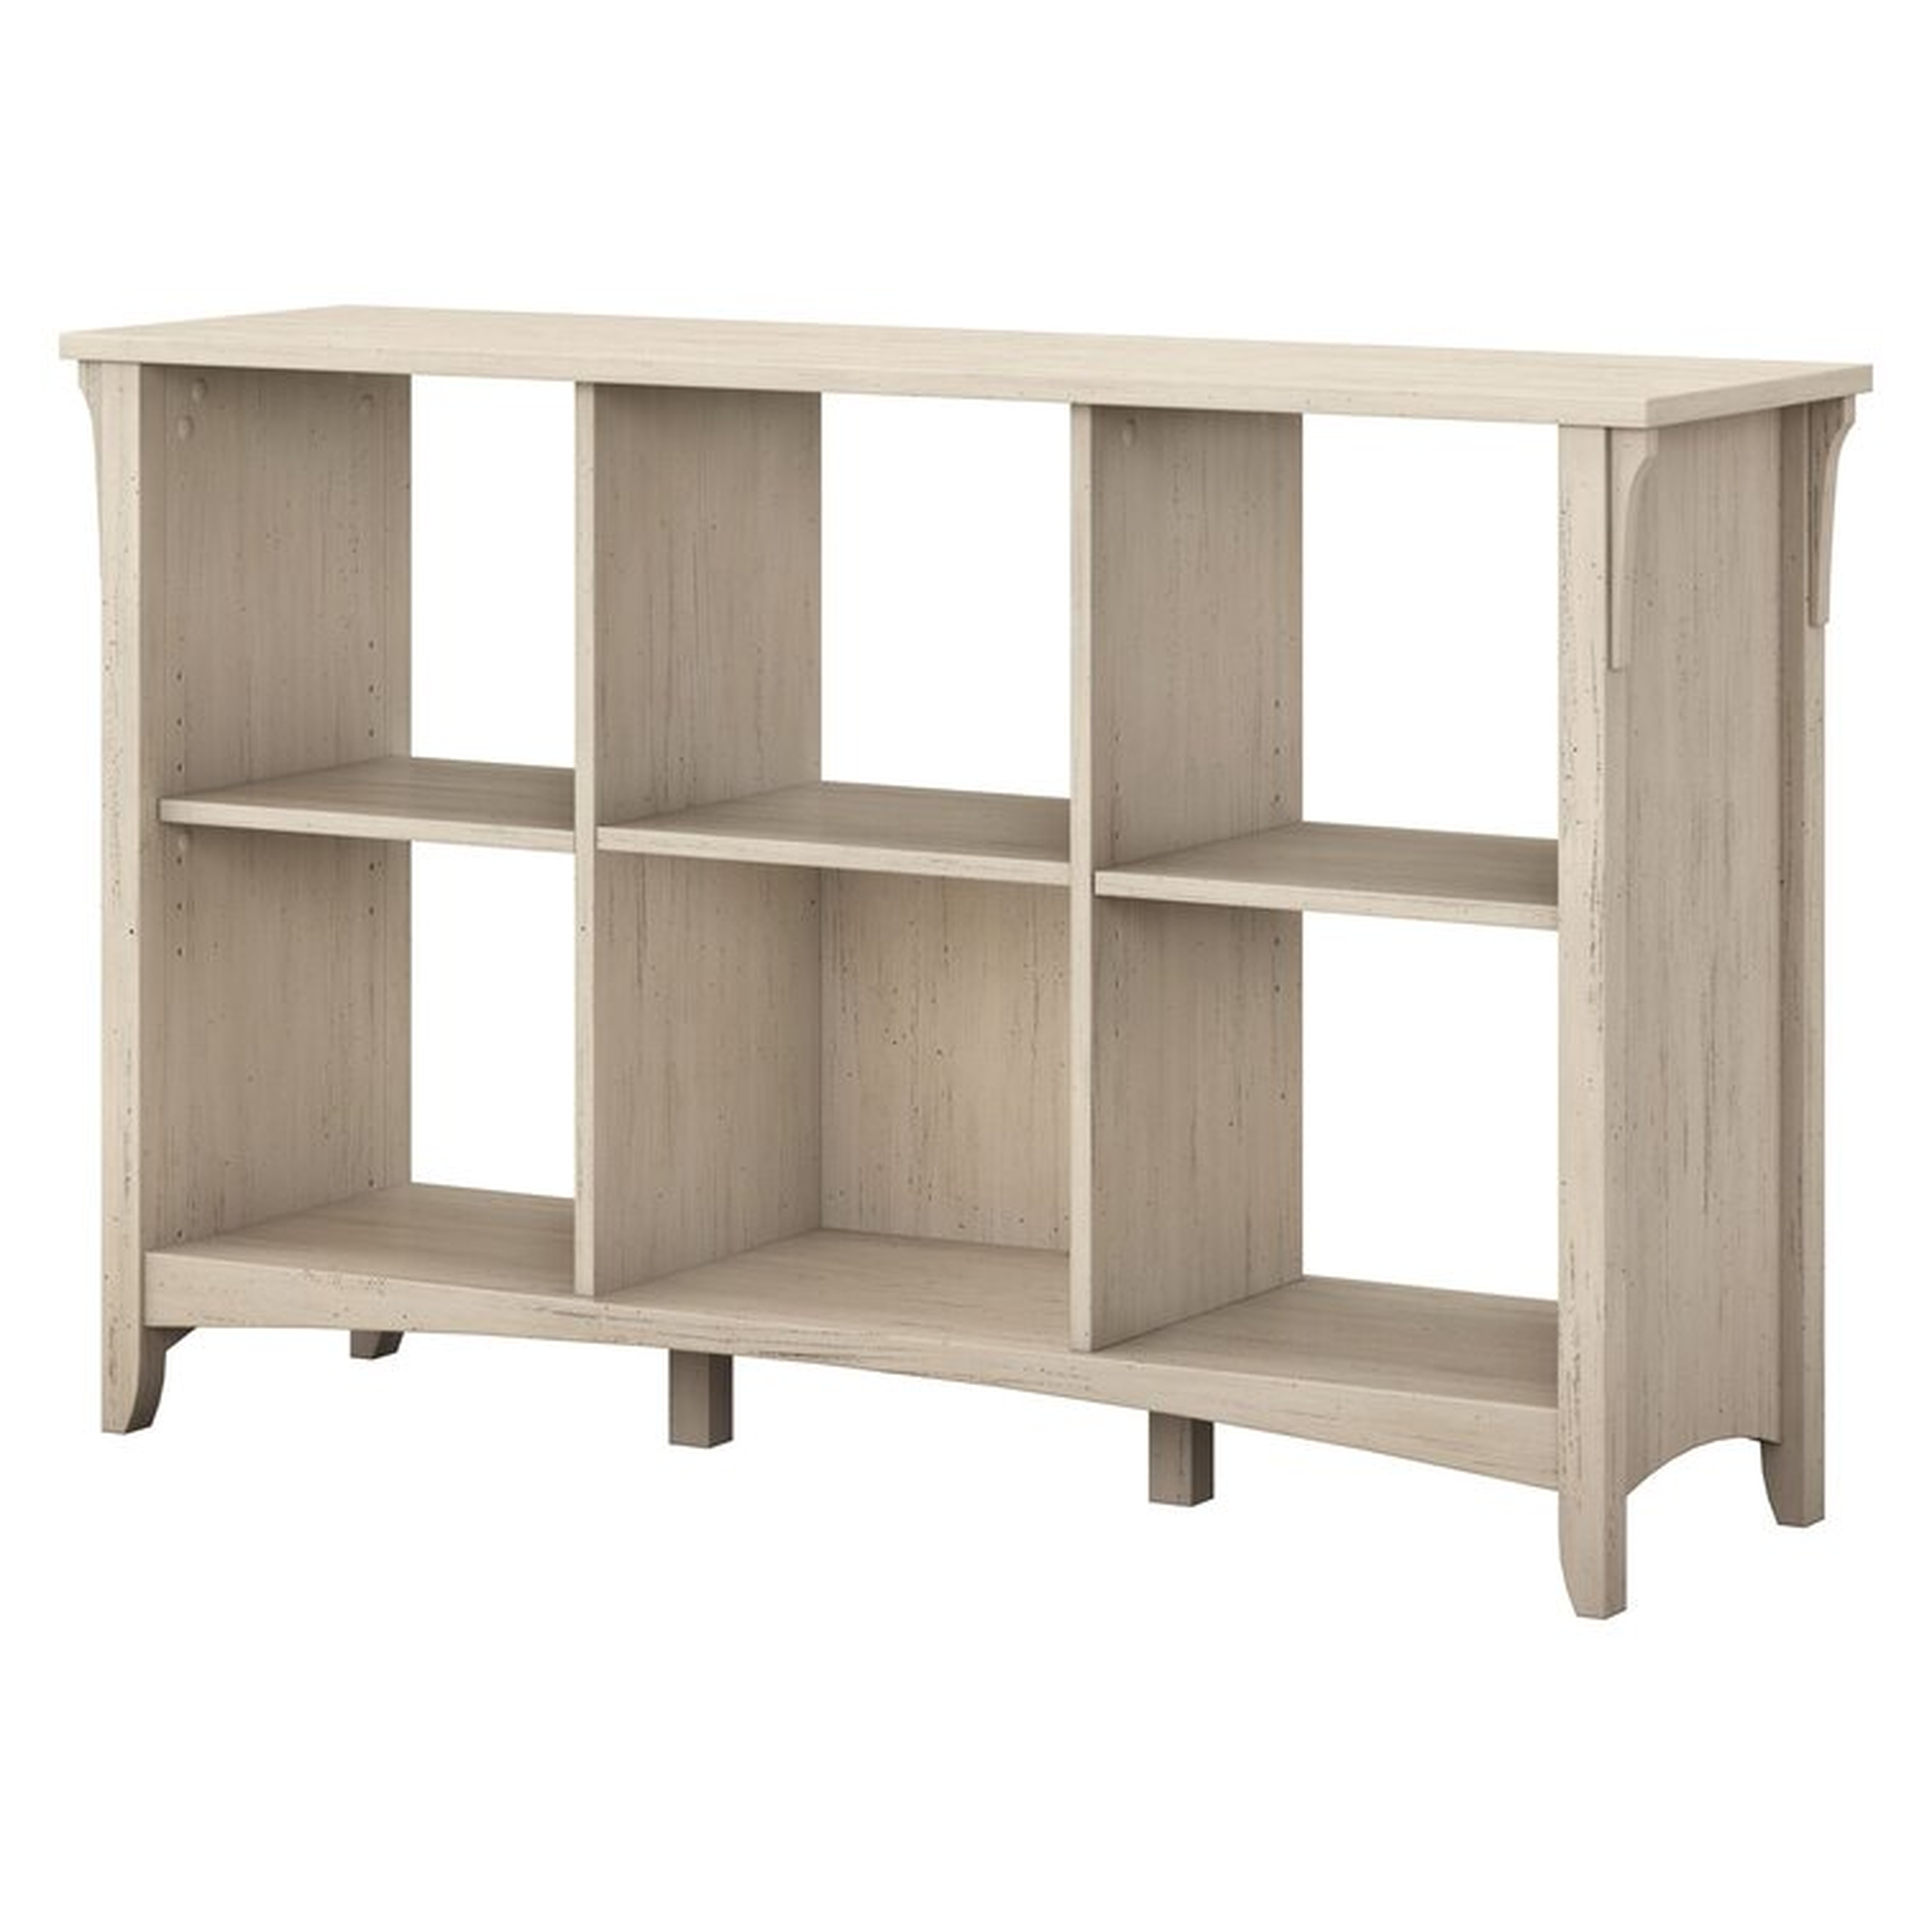 Pernell 30'' H x 48'' W Cube Bookcase - Wayfair